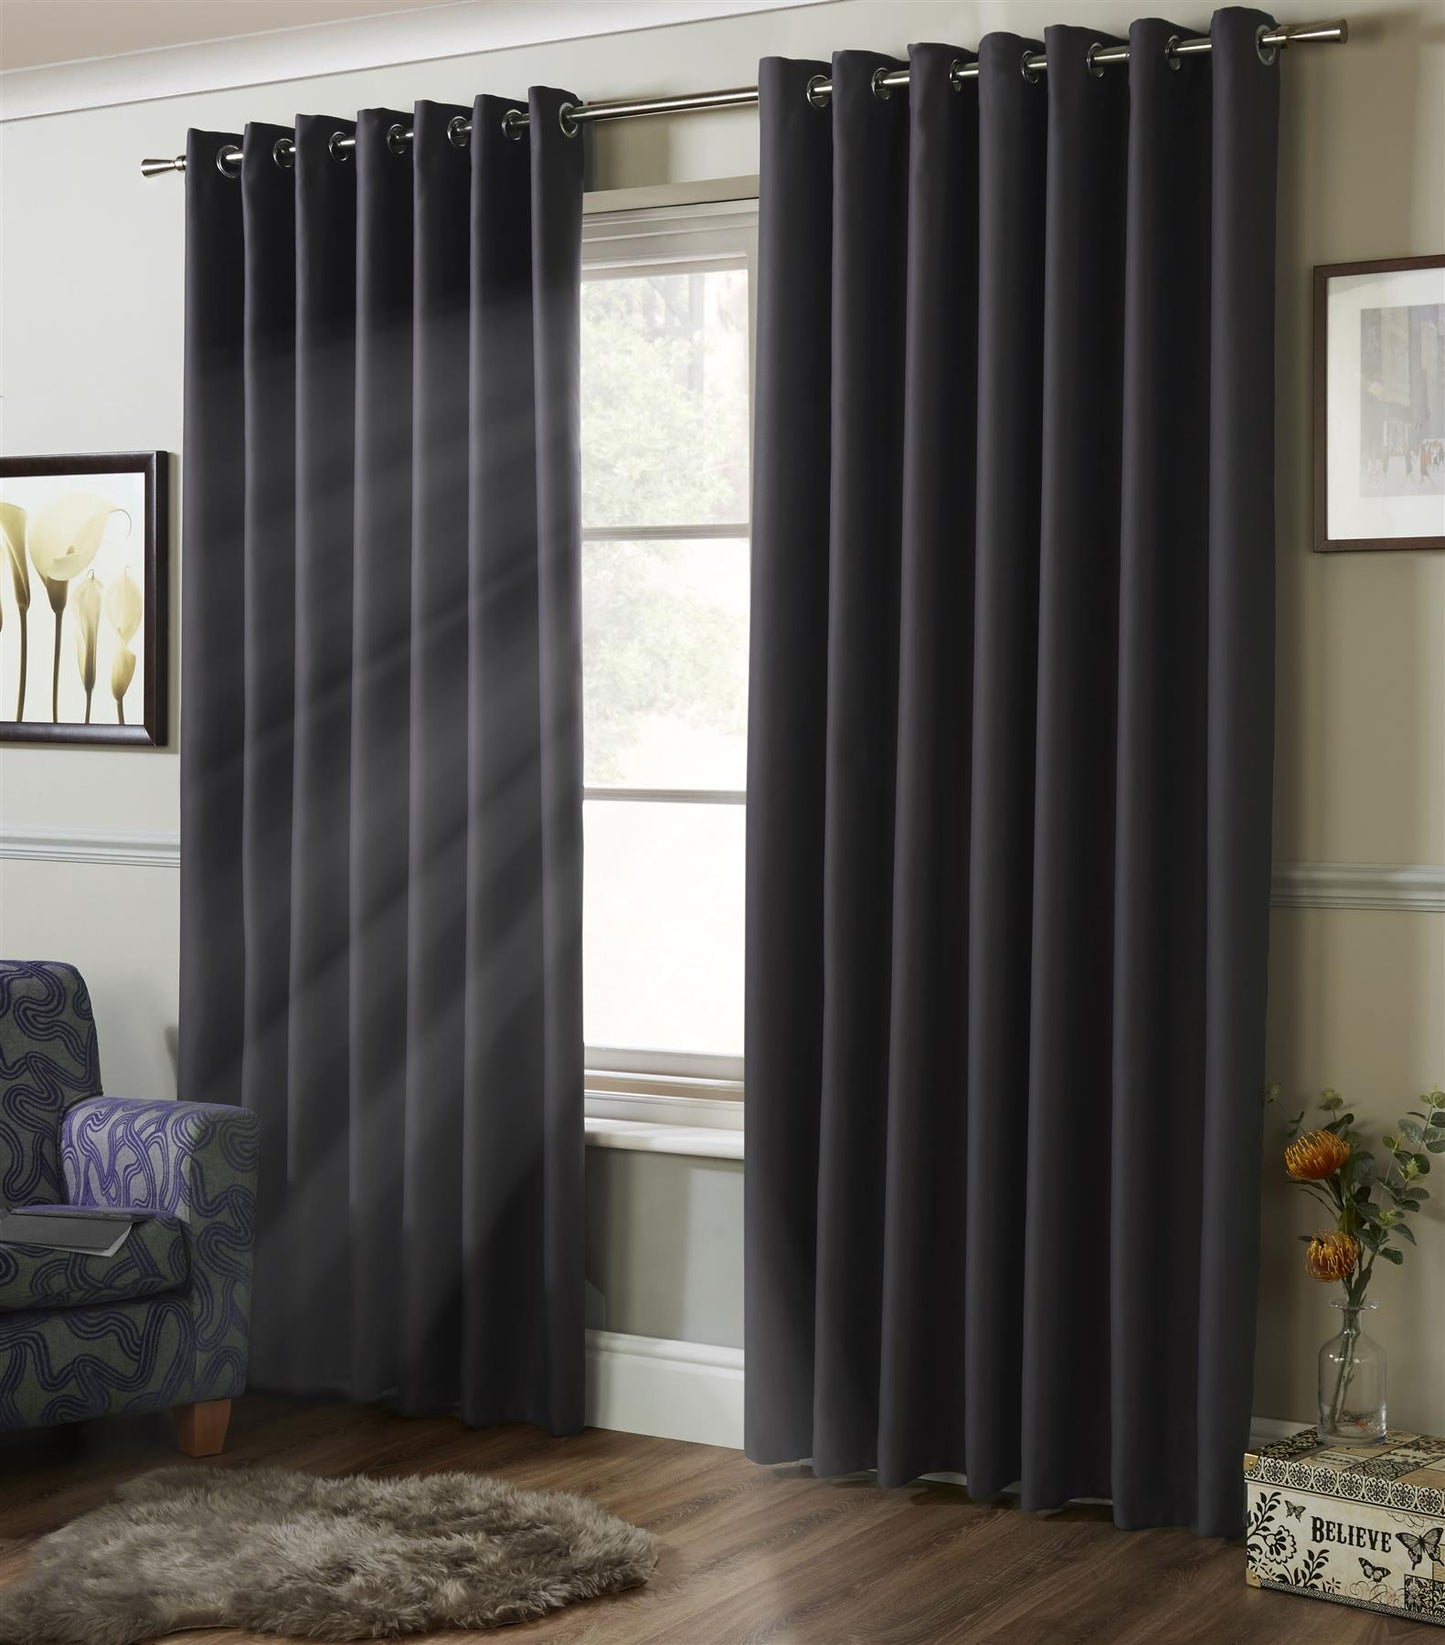 Charcoal Blackout Thermal Eyelet Curtains - Pair